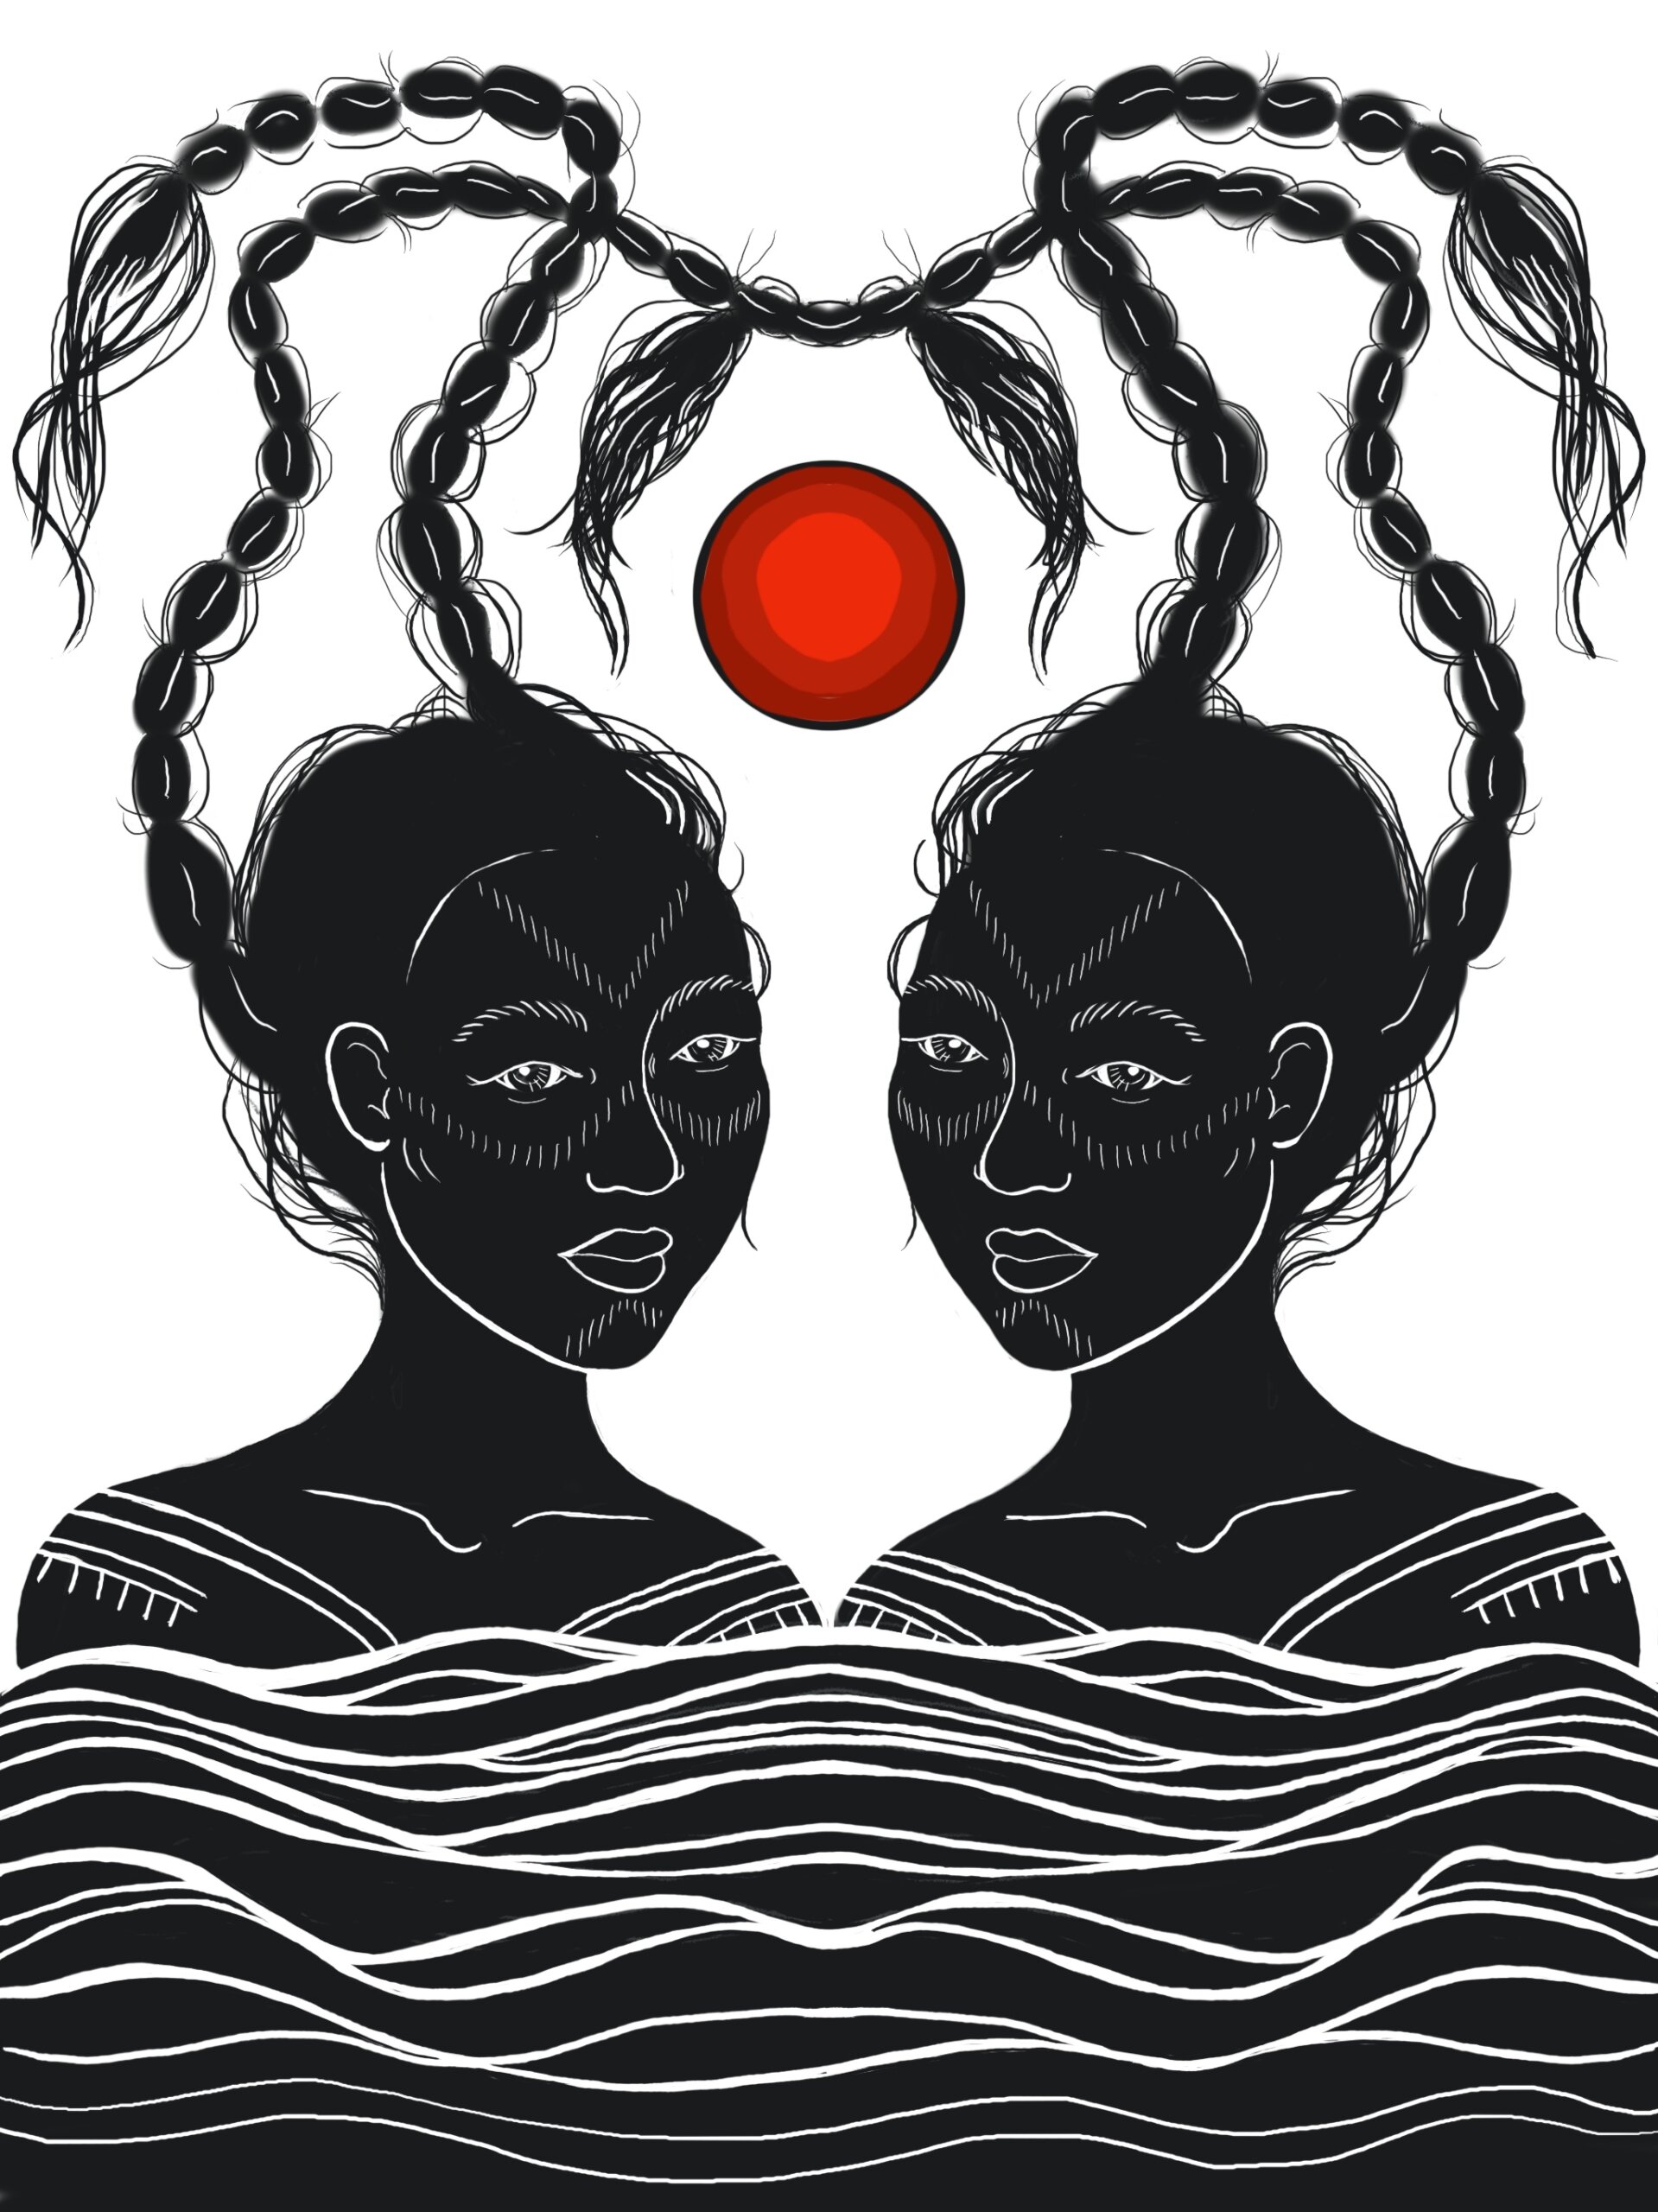 A black-and-white illustration of two Indigenous with long braids of hair that are intertwined above their heads. A blood red moon is between them.